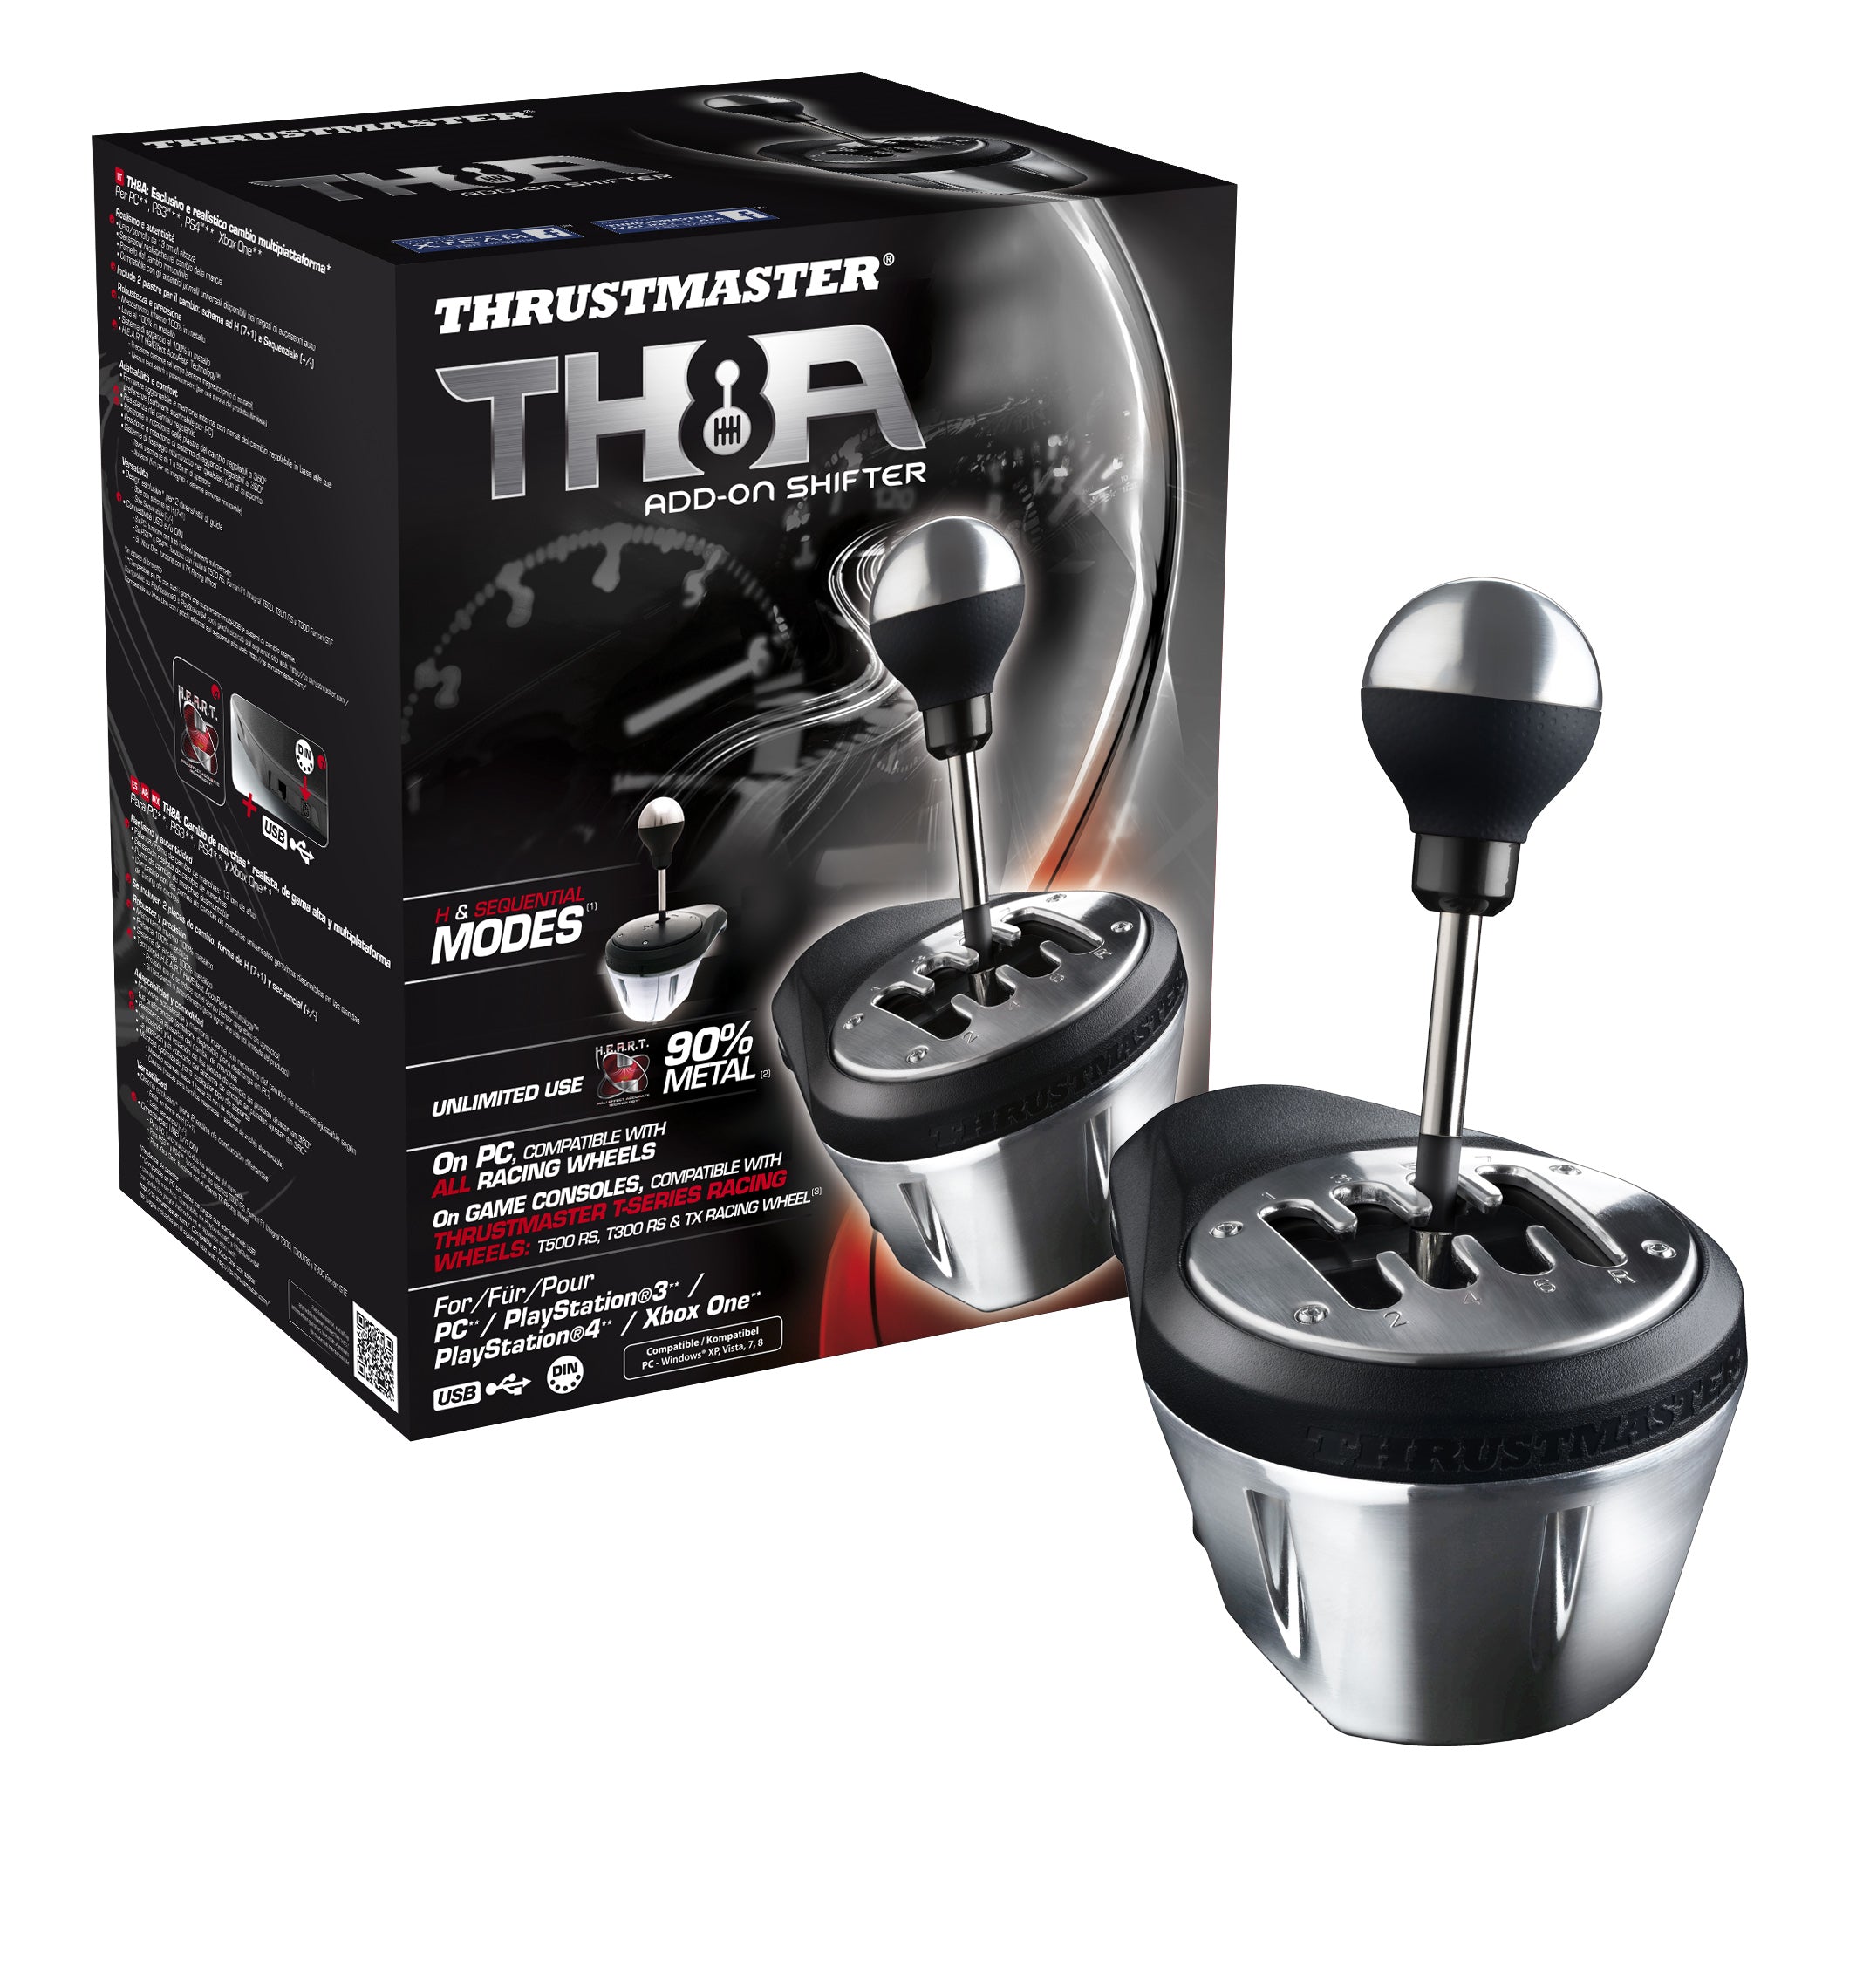 THRUSTMASTER TH8A ADD-ON SHIFTER PS4/XB1/PS3/PC – Pit Lane Sim Racing